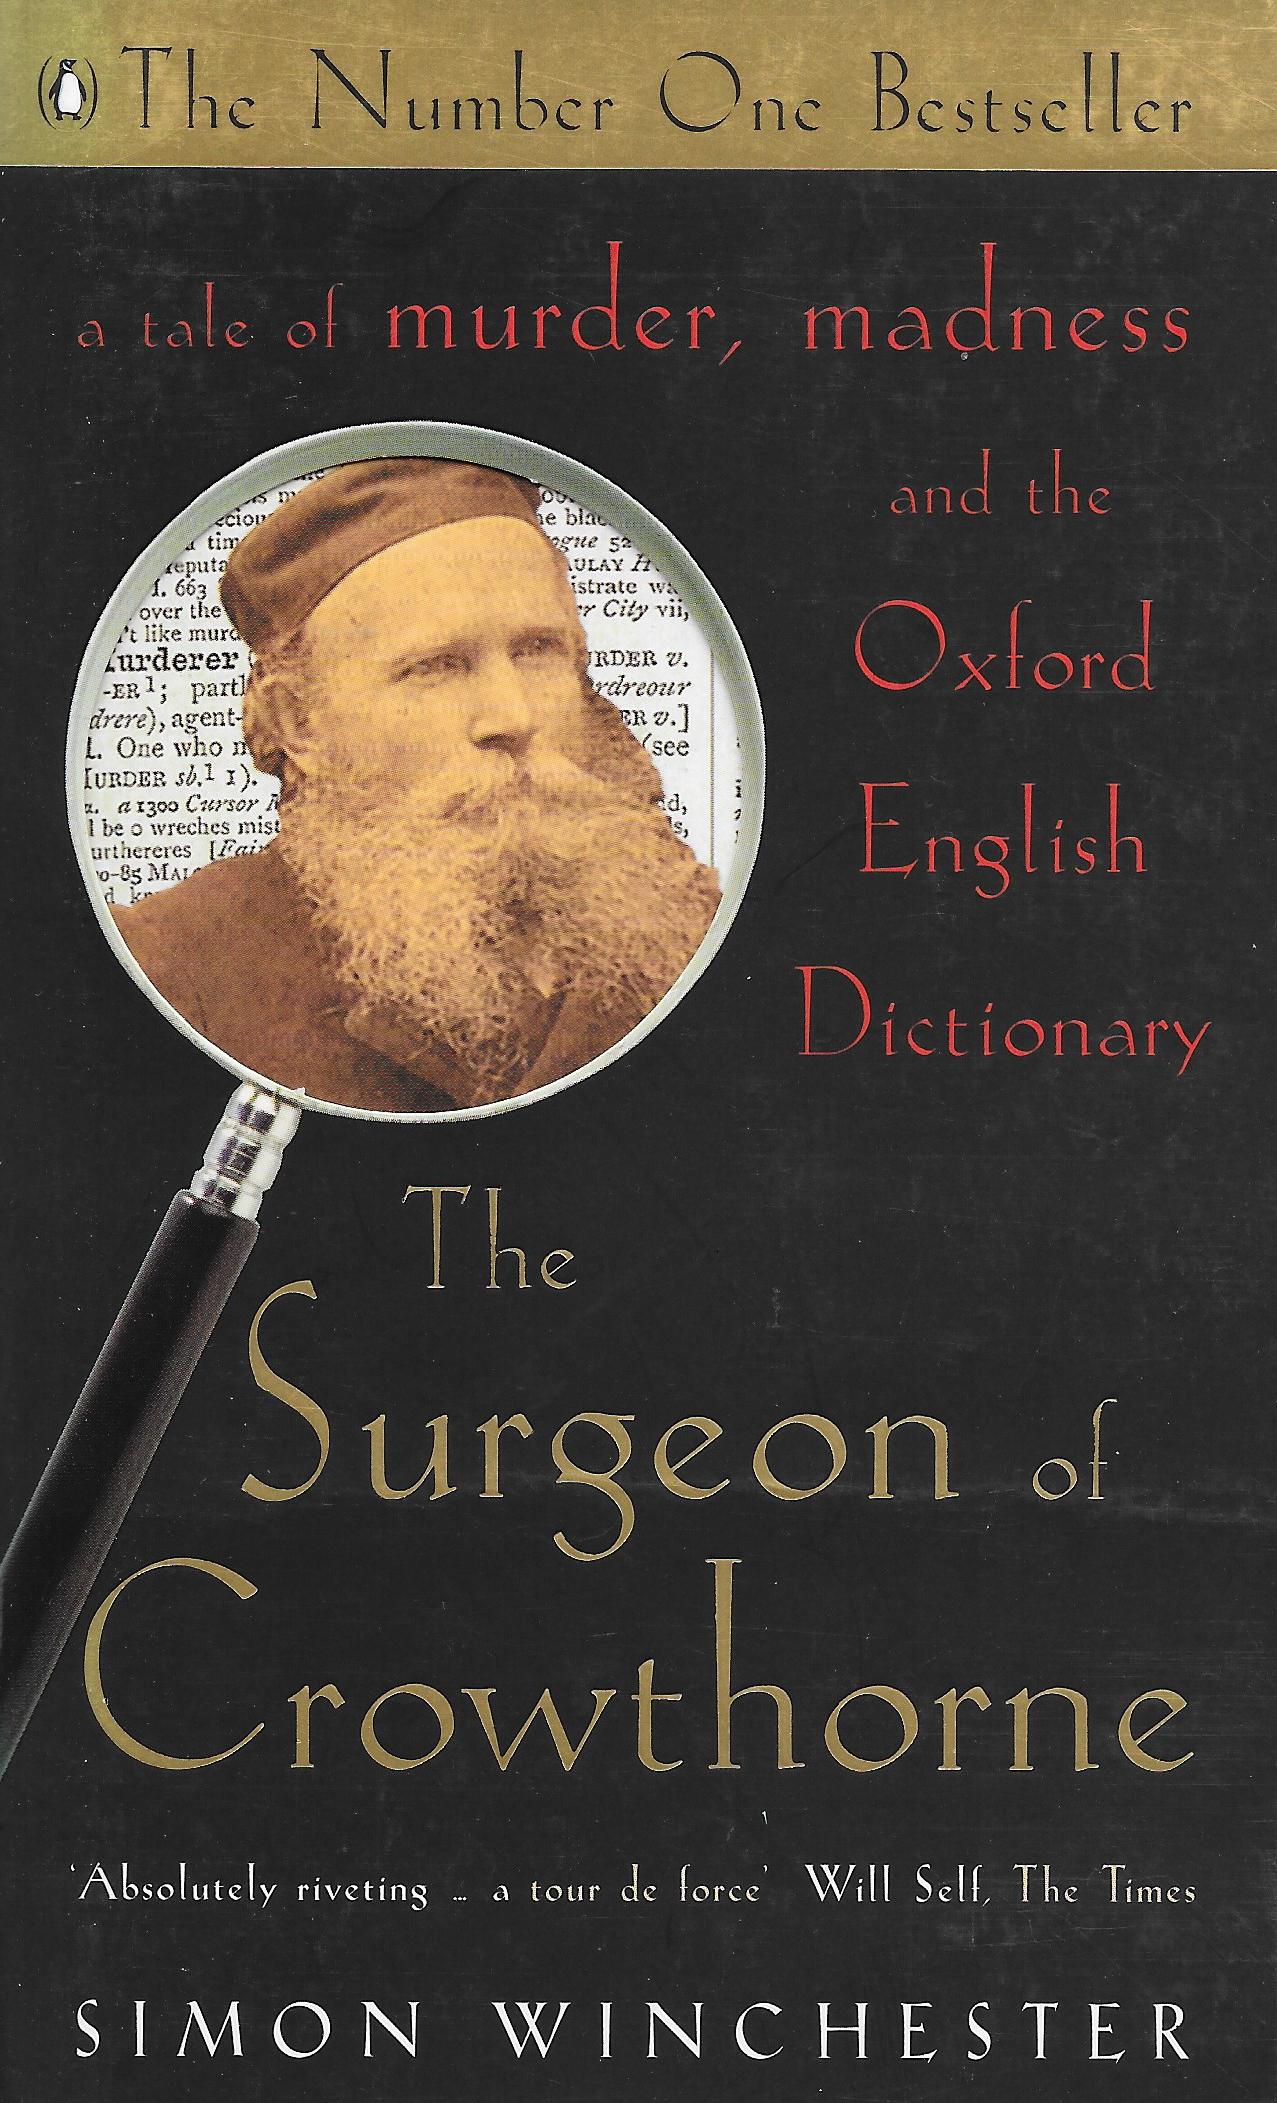 The Surgeon of Crowthorne: A Tale of Murder, Madness and the Oxford English Dictionary